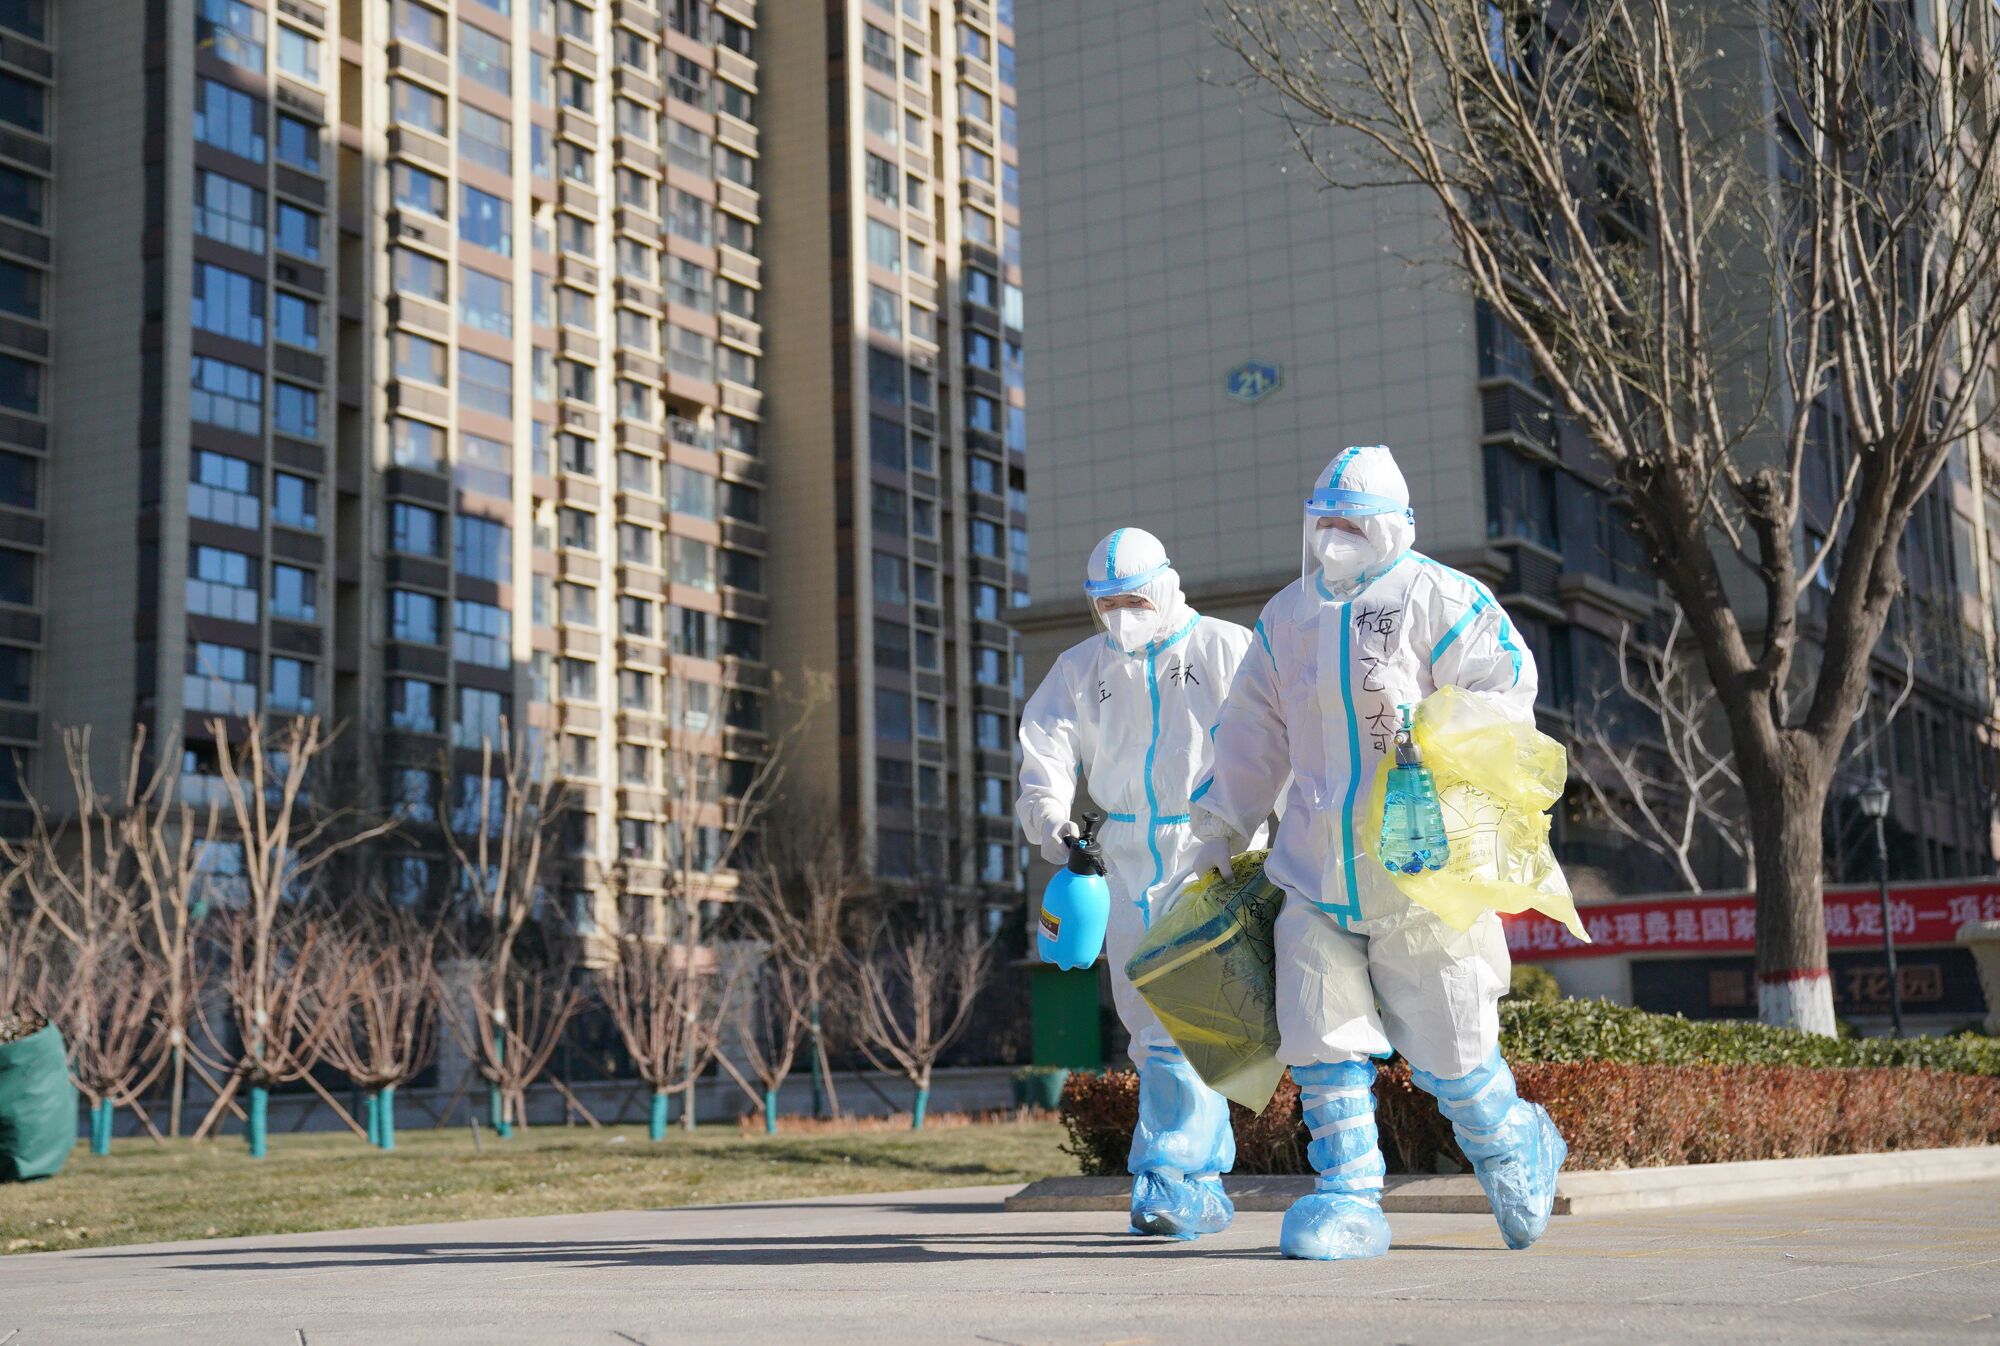 Workers carry a container of coronavirus test samples outside a neighborhood in Shijiazhuang, China.